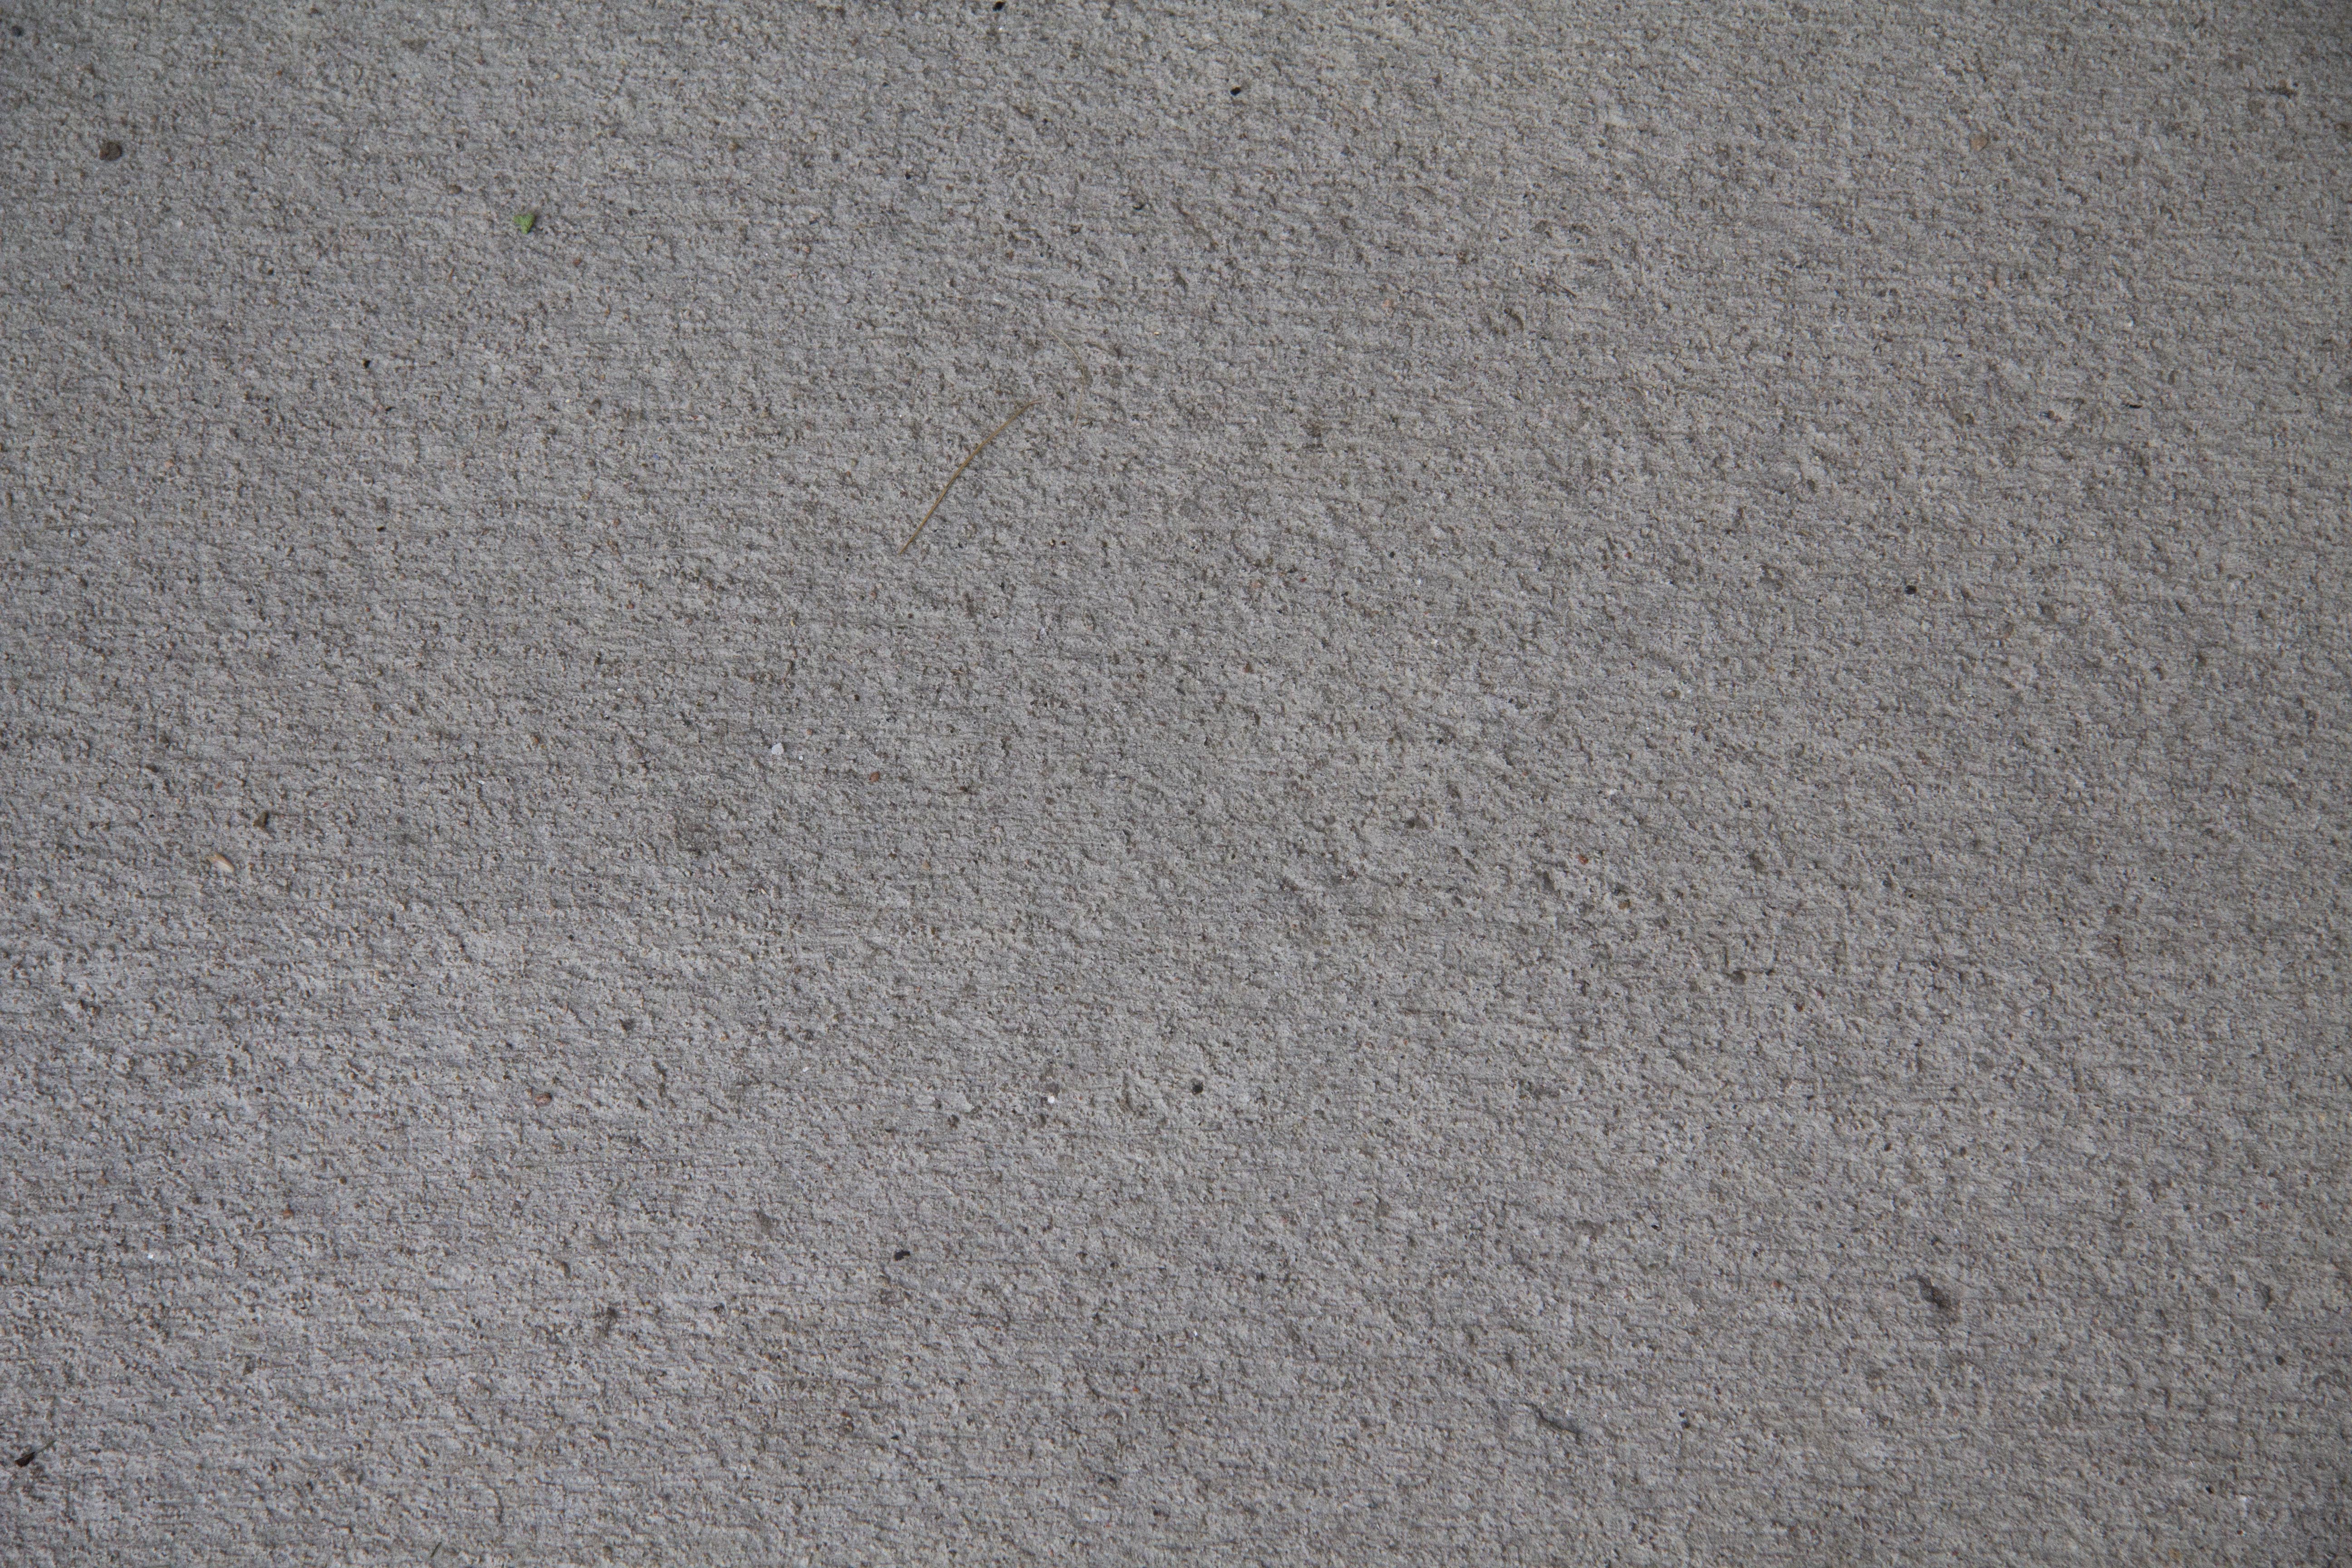 Bare Concrete Texture « Lovelystock Textures - Free, High Quality ...